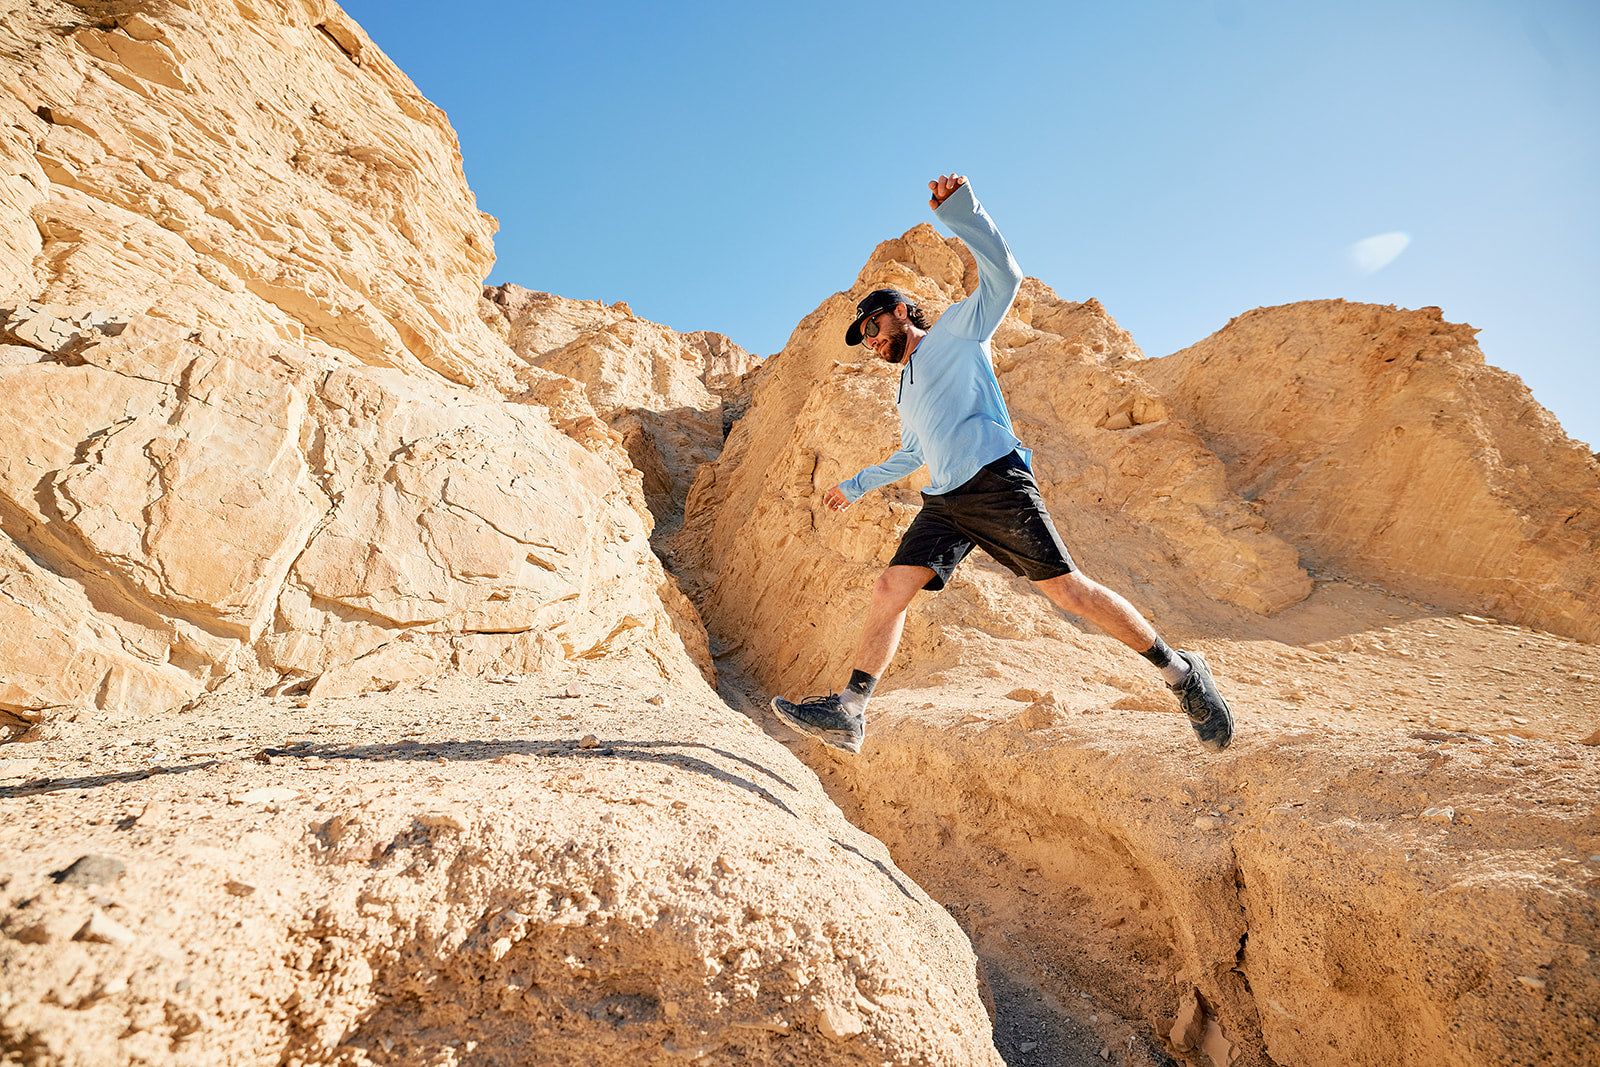 a man jumps from one rock to another in a desert playground wearing a Ridge Merino solstice hoodie